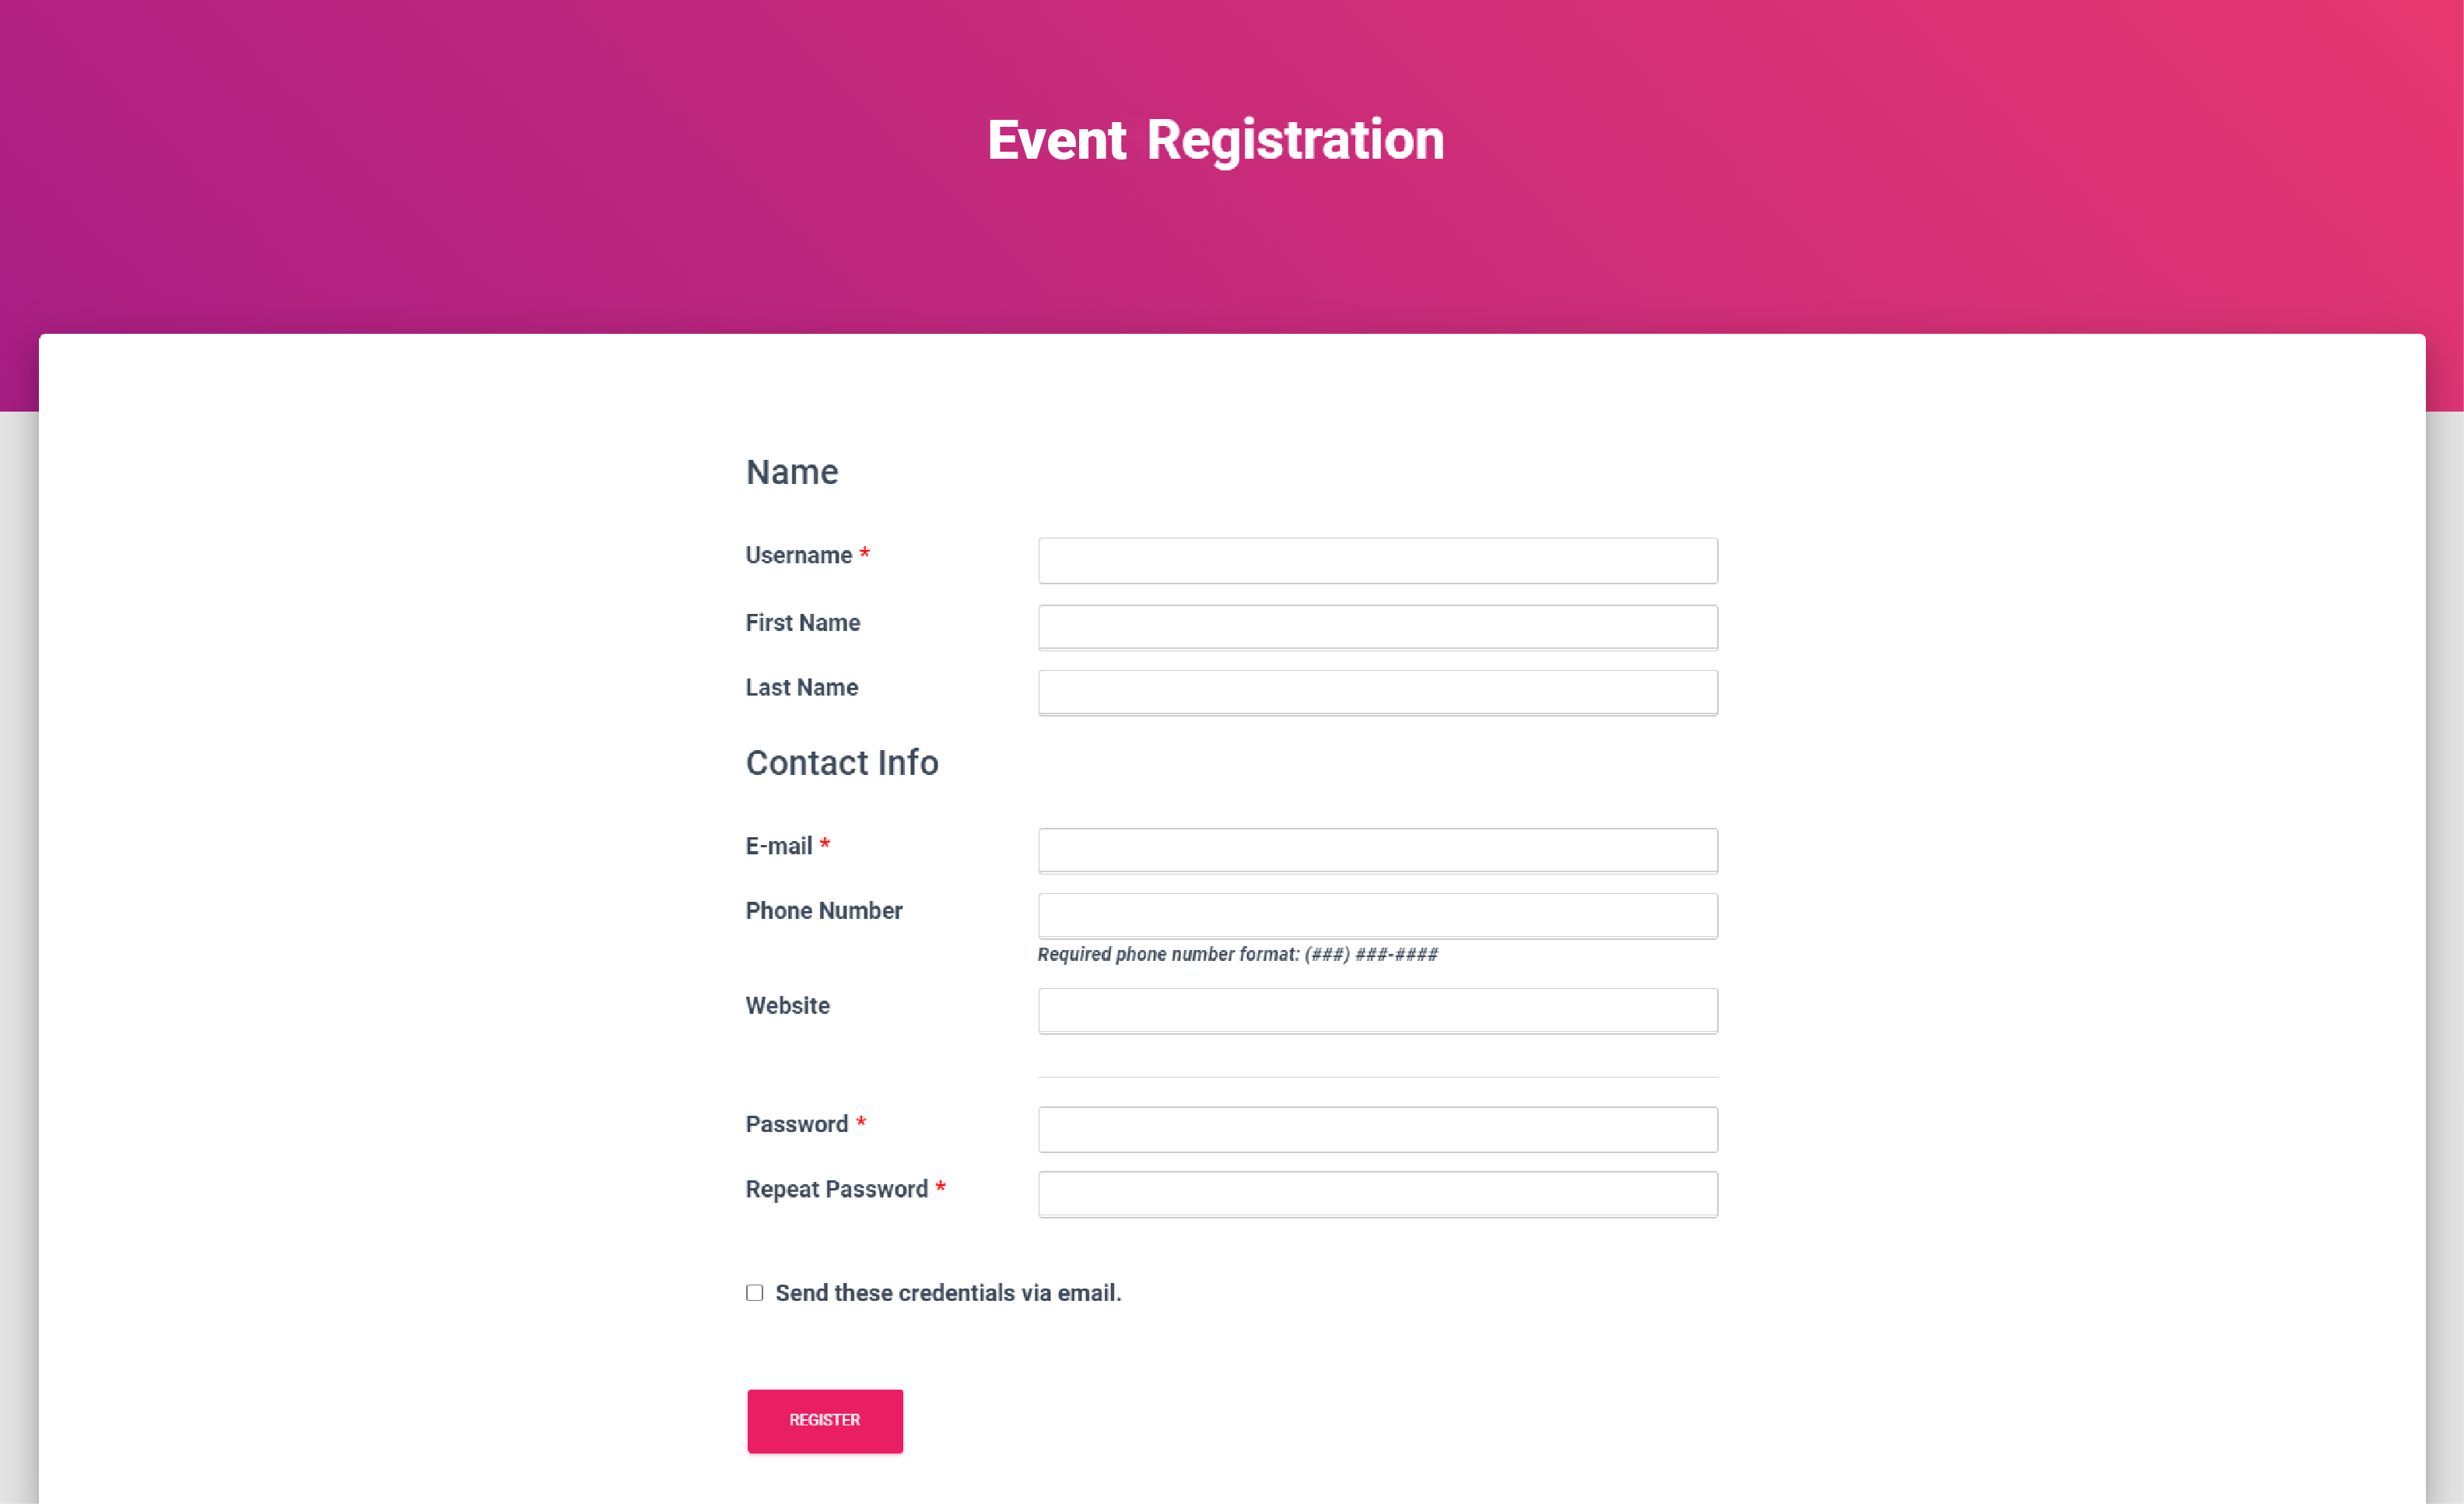 Event Registration Page in WordPress